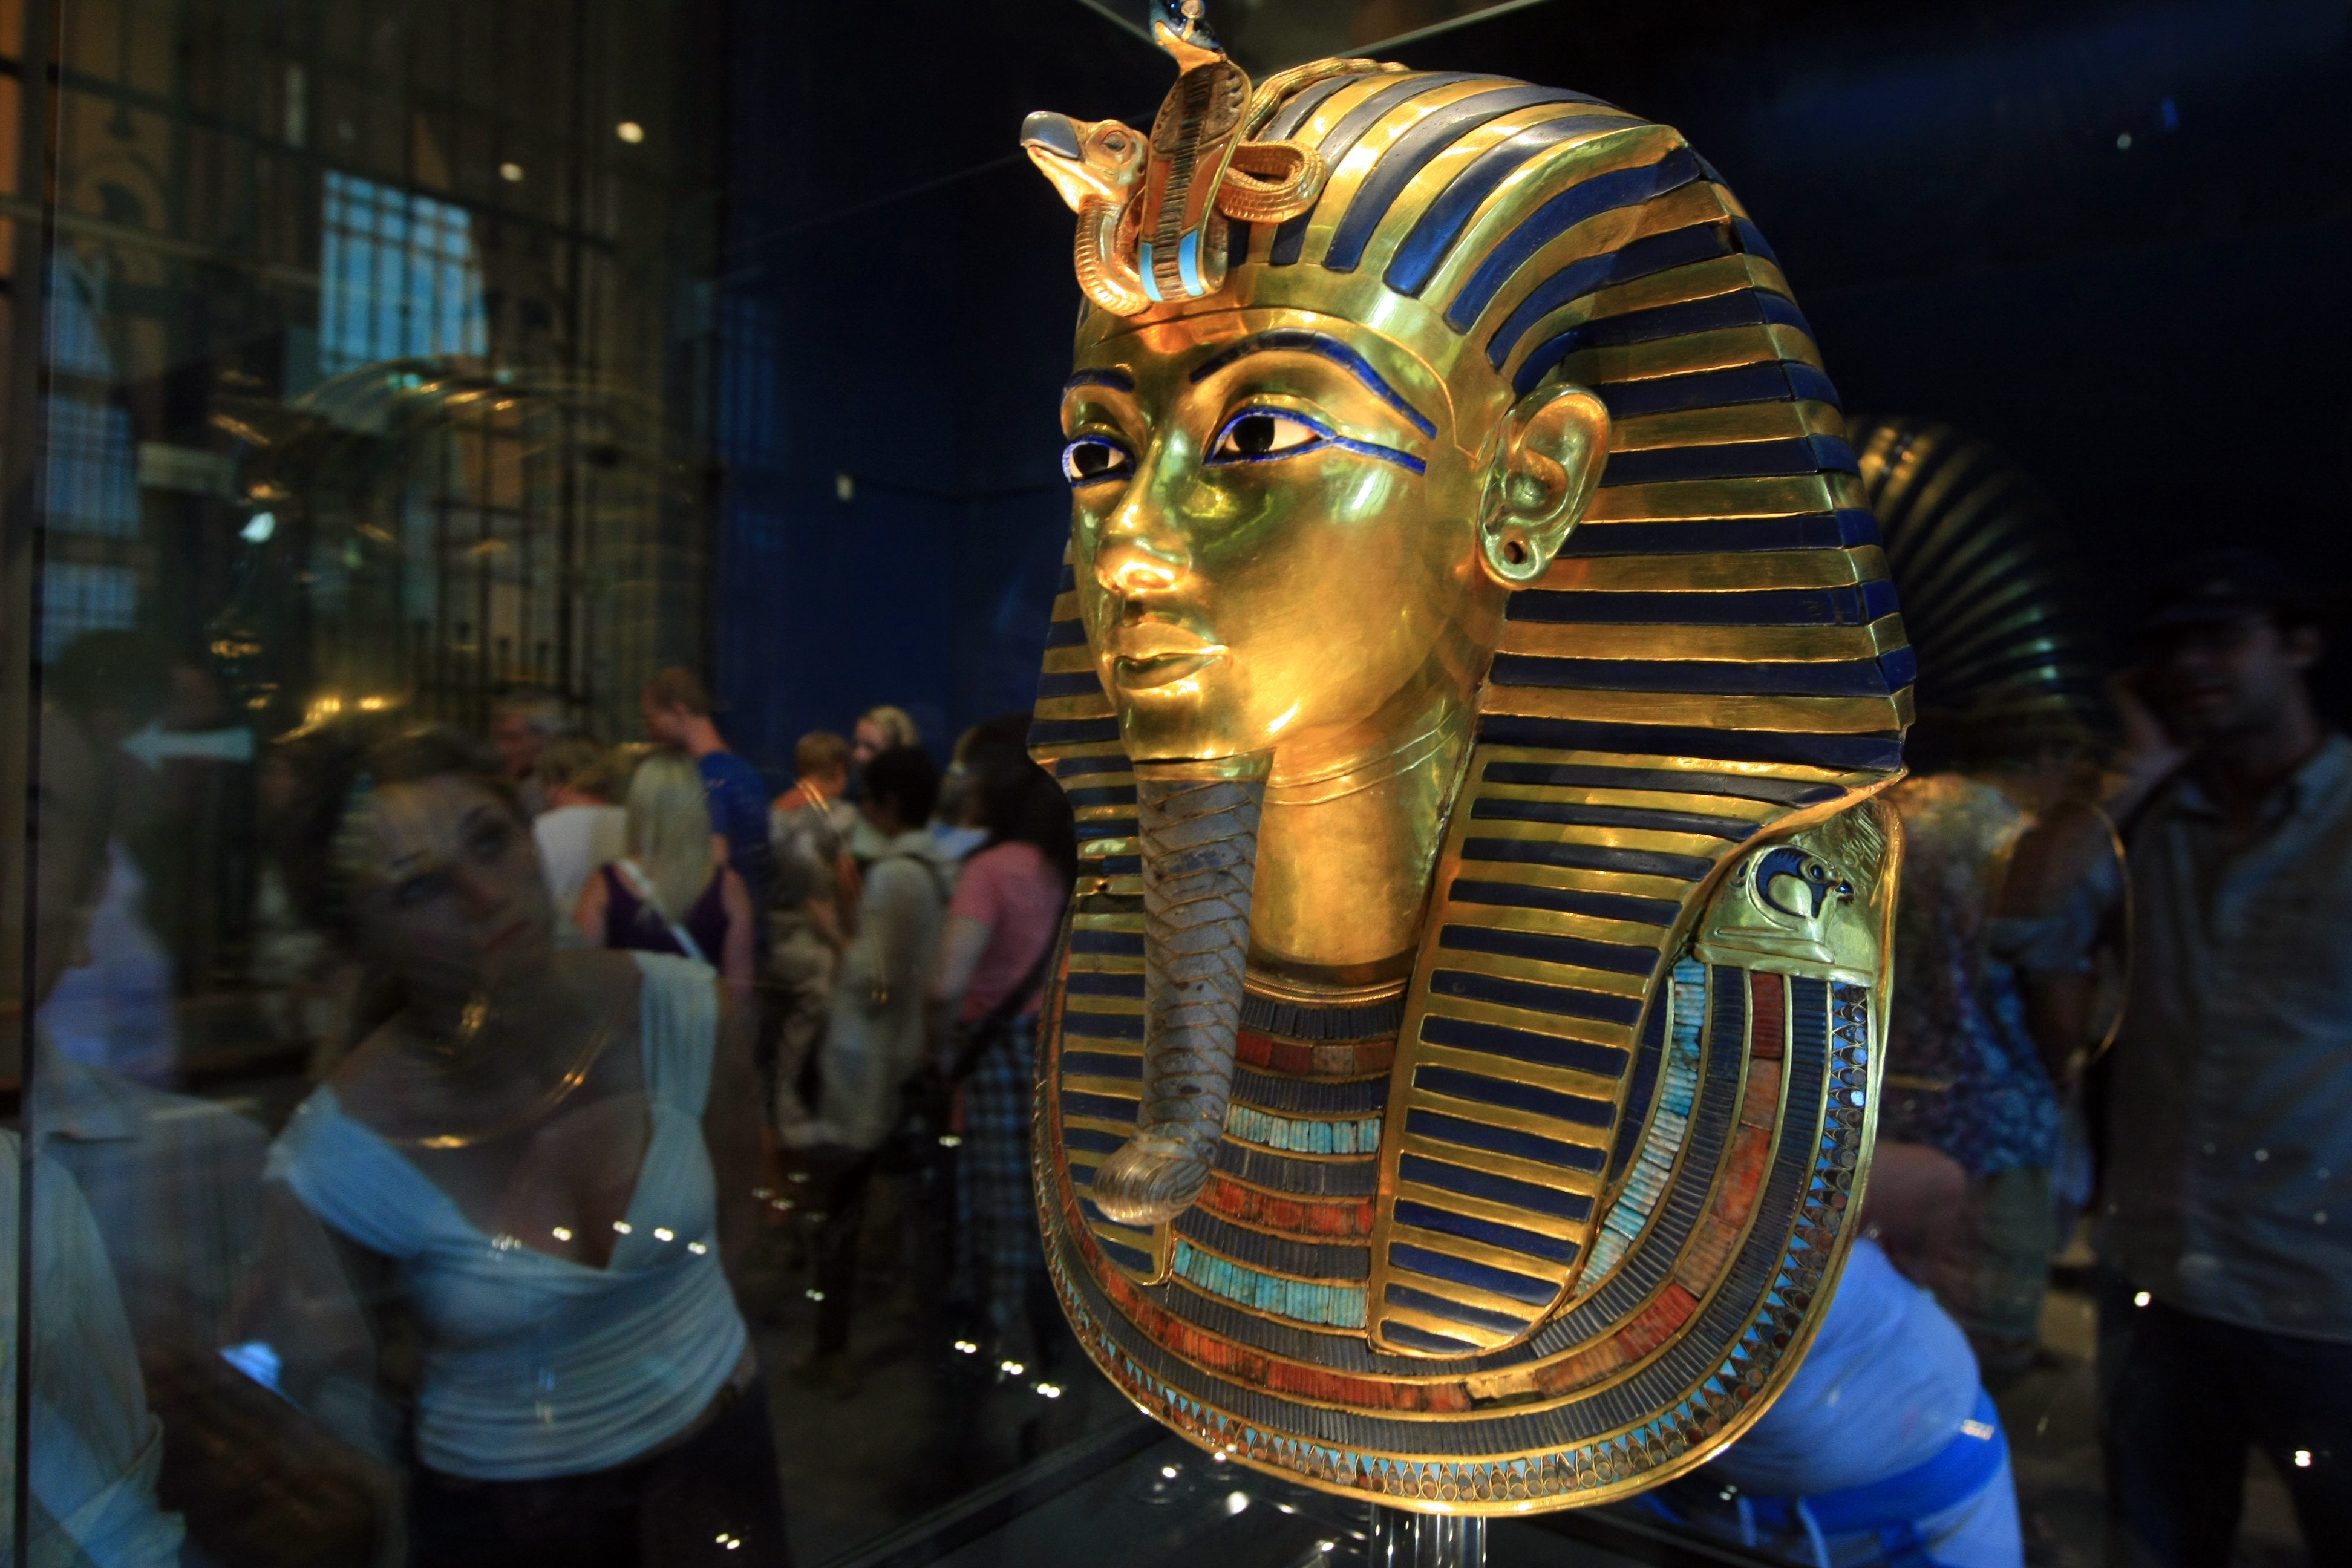 A picture taken on October 20, 2009 shows King Tutankhamun's golden mask displayed at the Egyptian museum in Cairo.